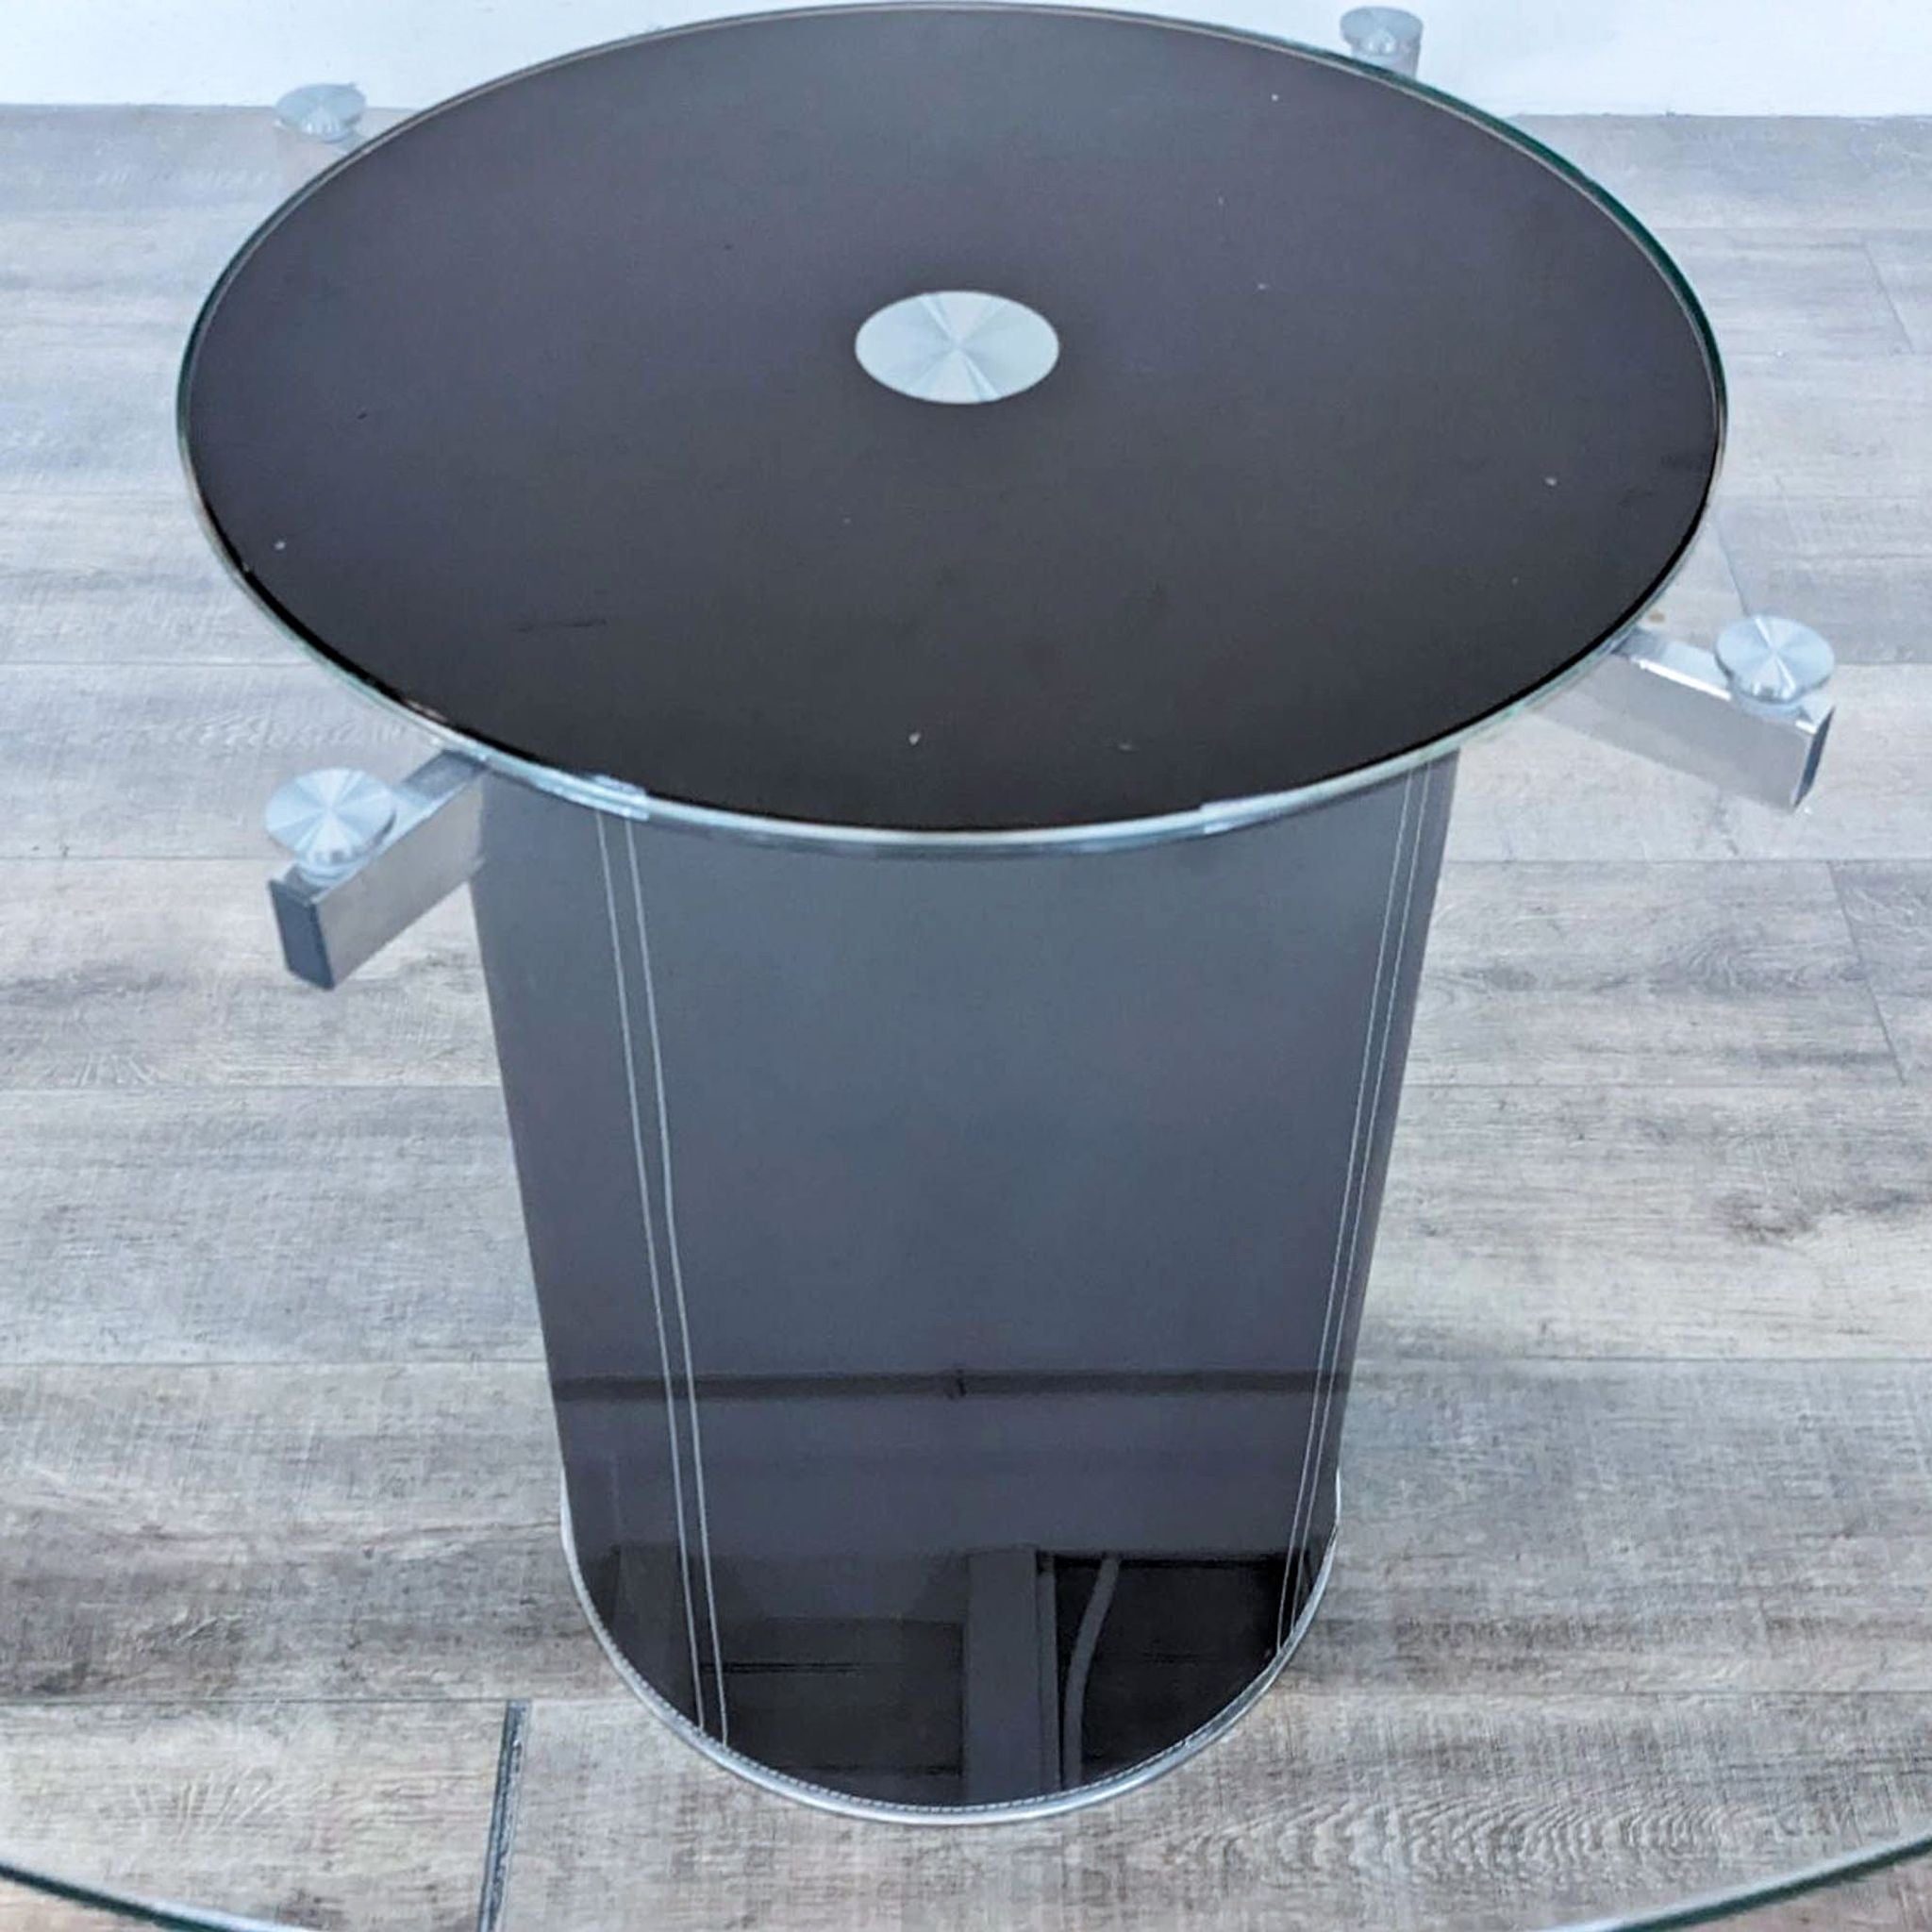 Scandinavian Designs Lauss table featuring a round glass top with a 360° spinning tray and a sleek base of steel and regenerated leather.